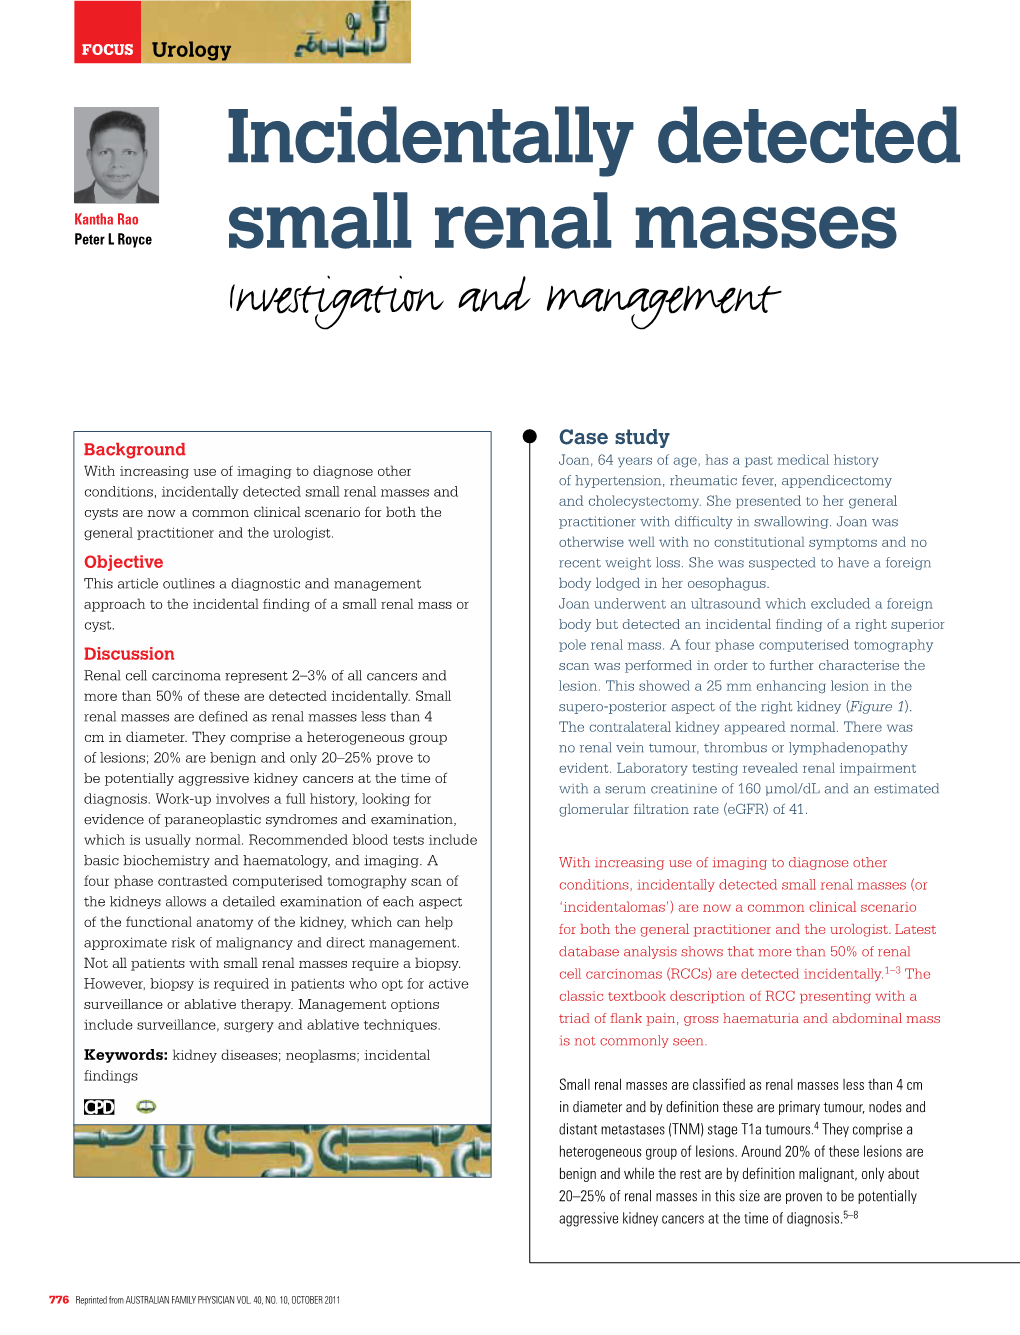 Incidentally Detected Small Renal Masses – Investigation and Management FOCUS